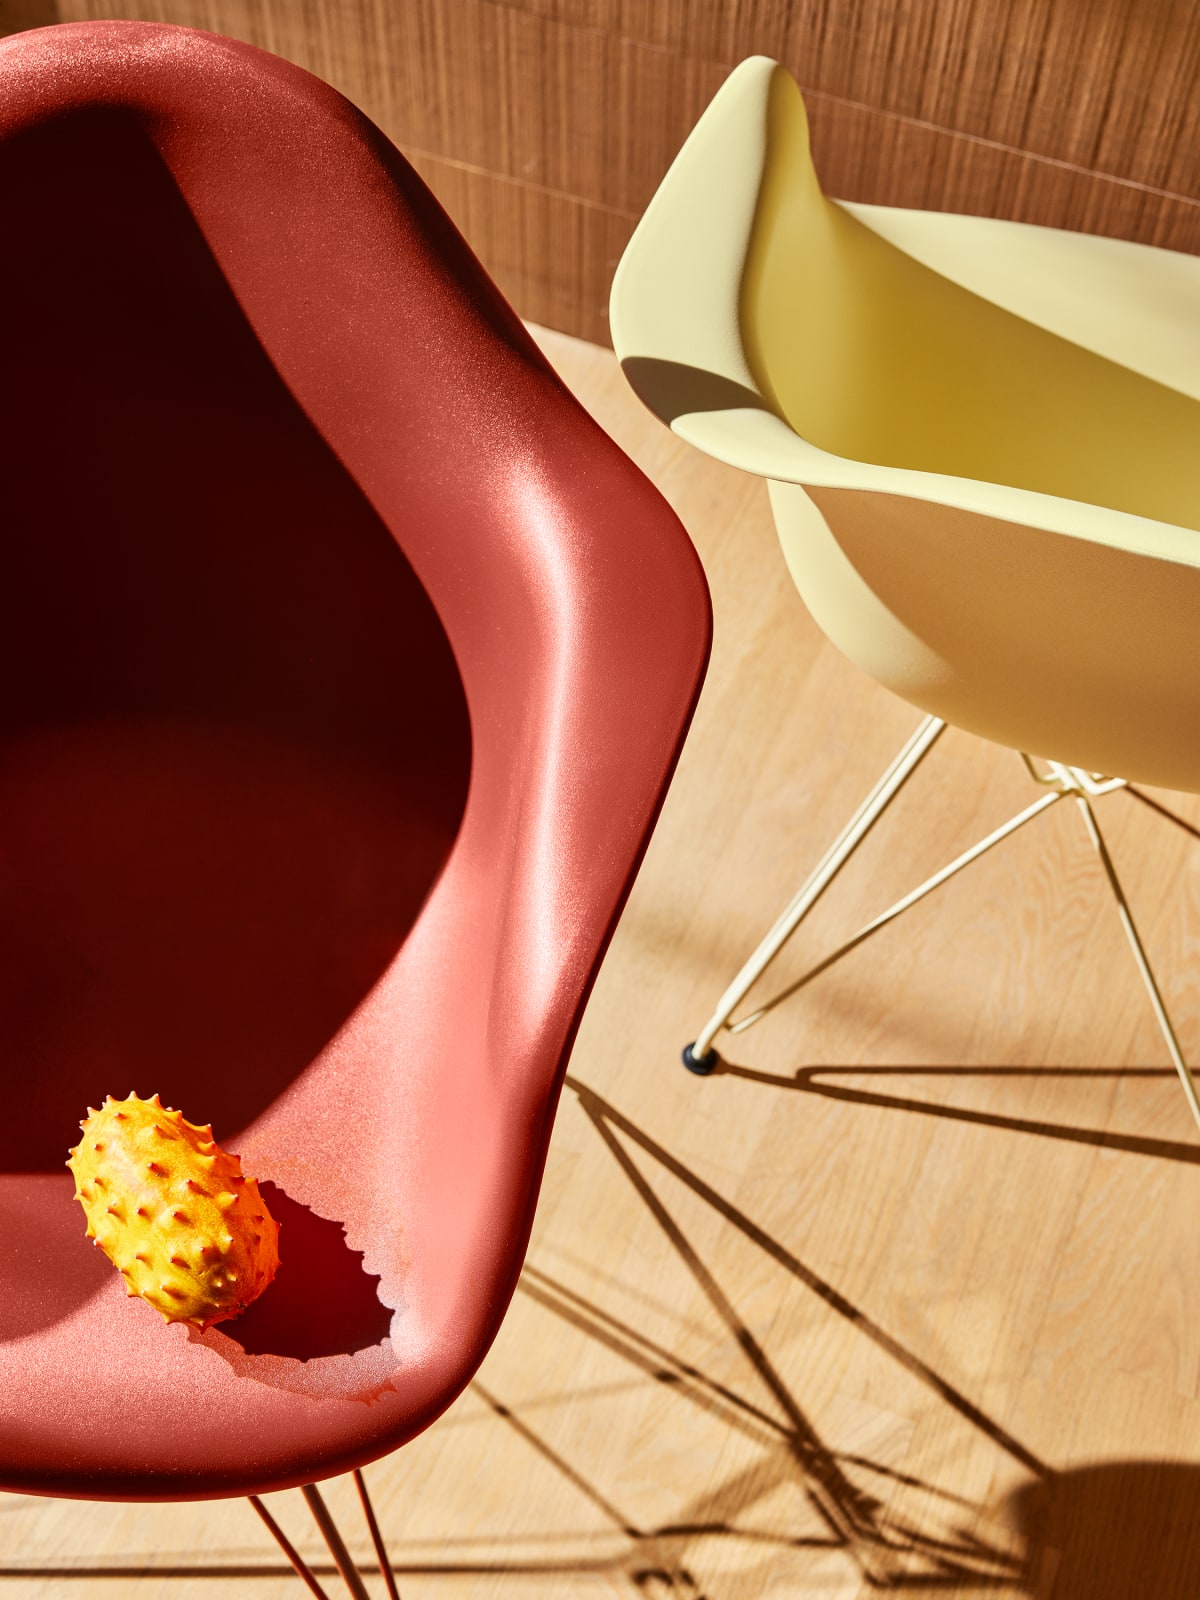 Herman Miller x HAY Eames Moulded Plastic Armchair in iron red and yellow.